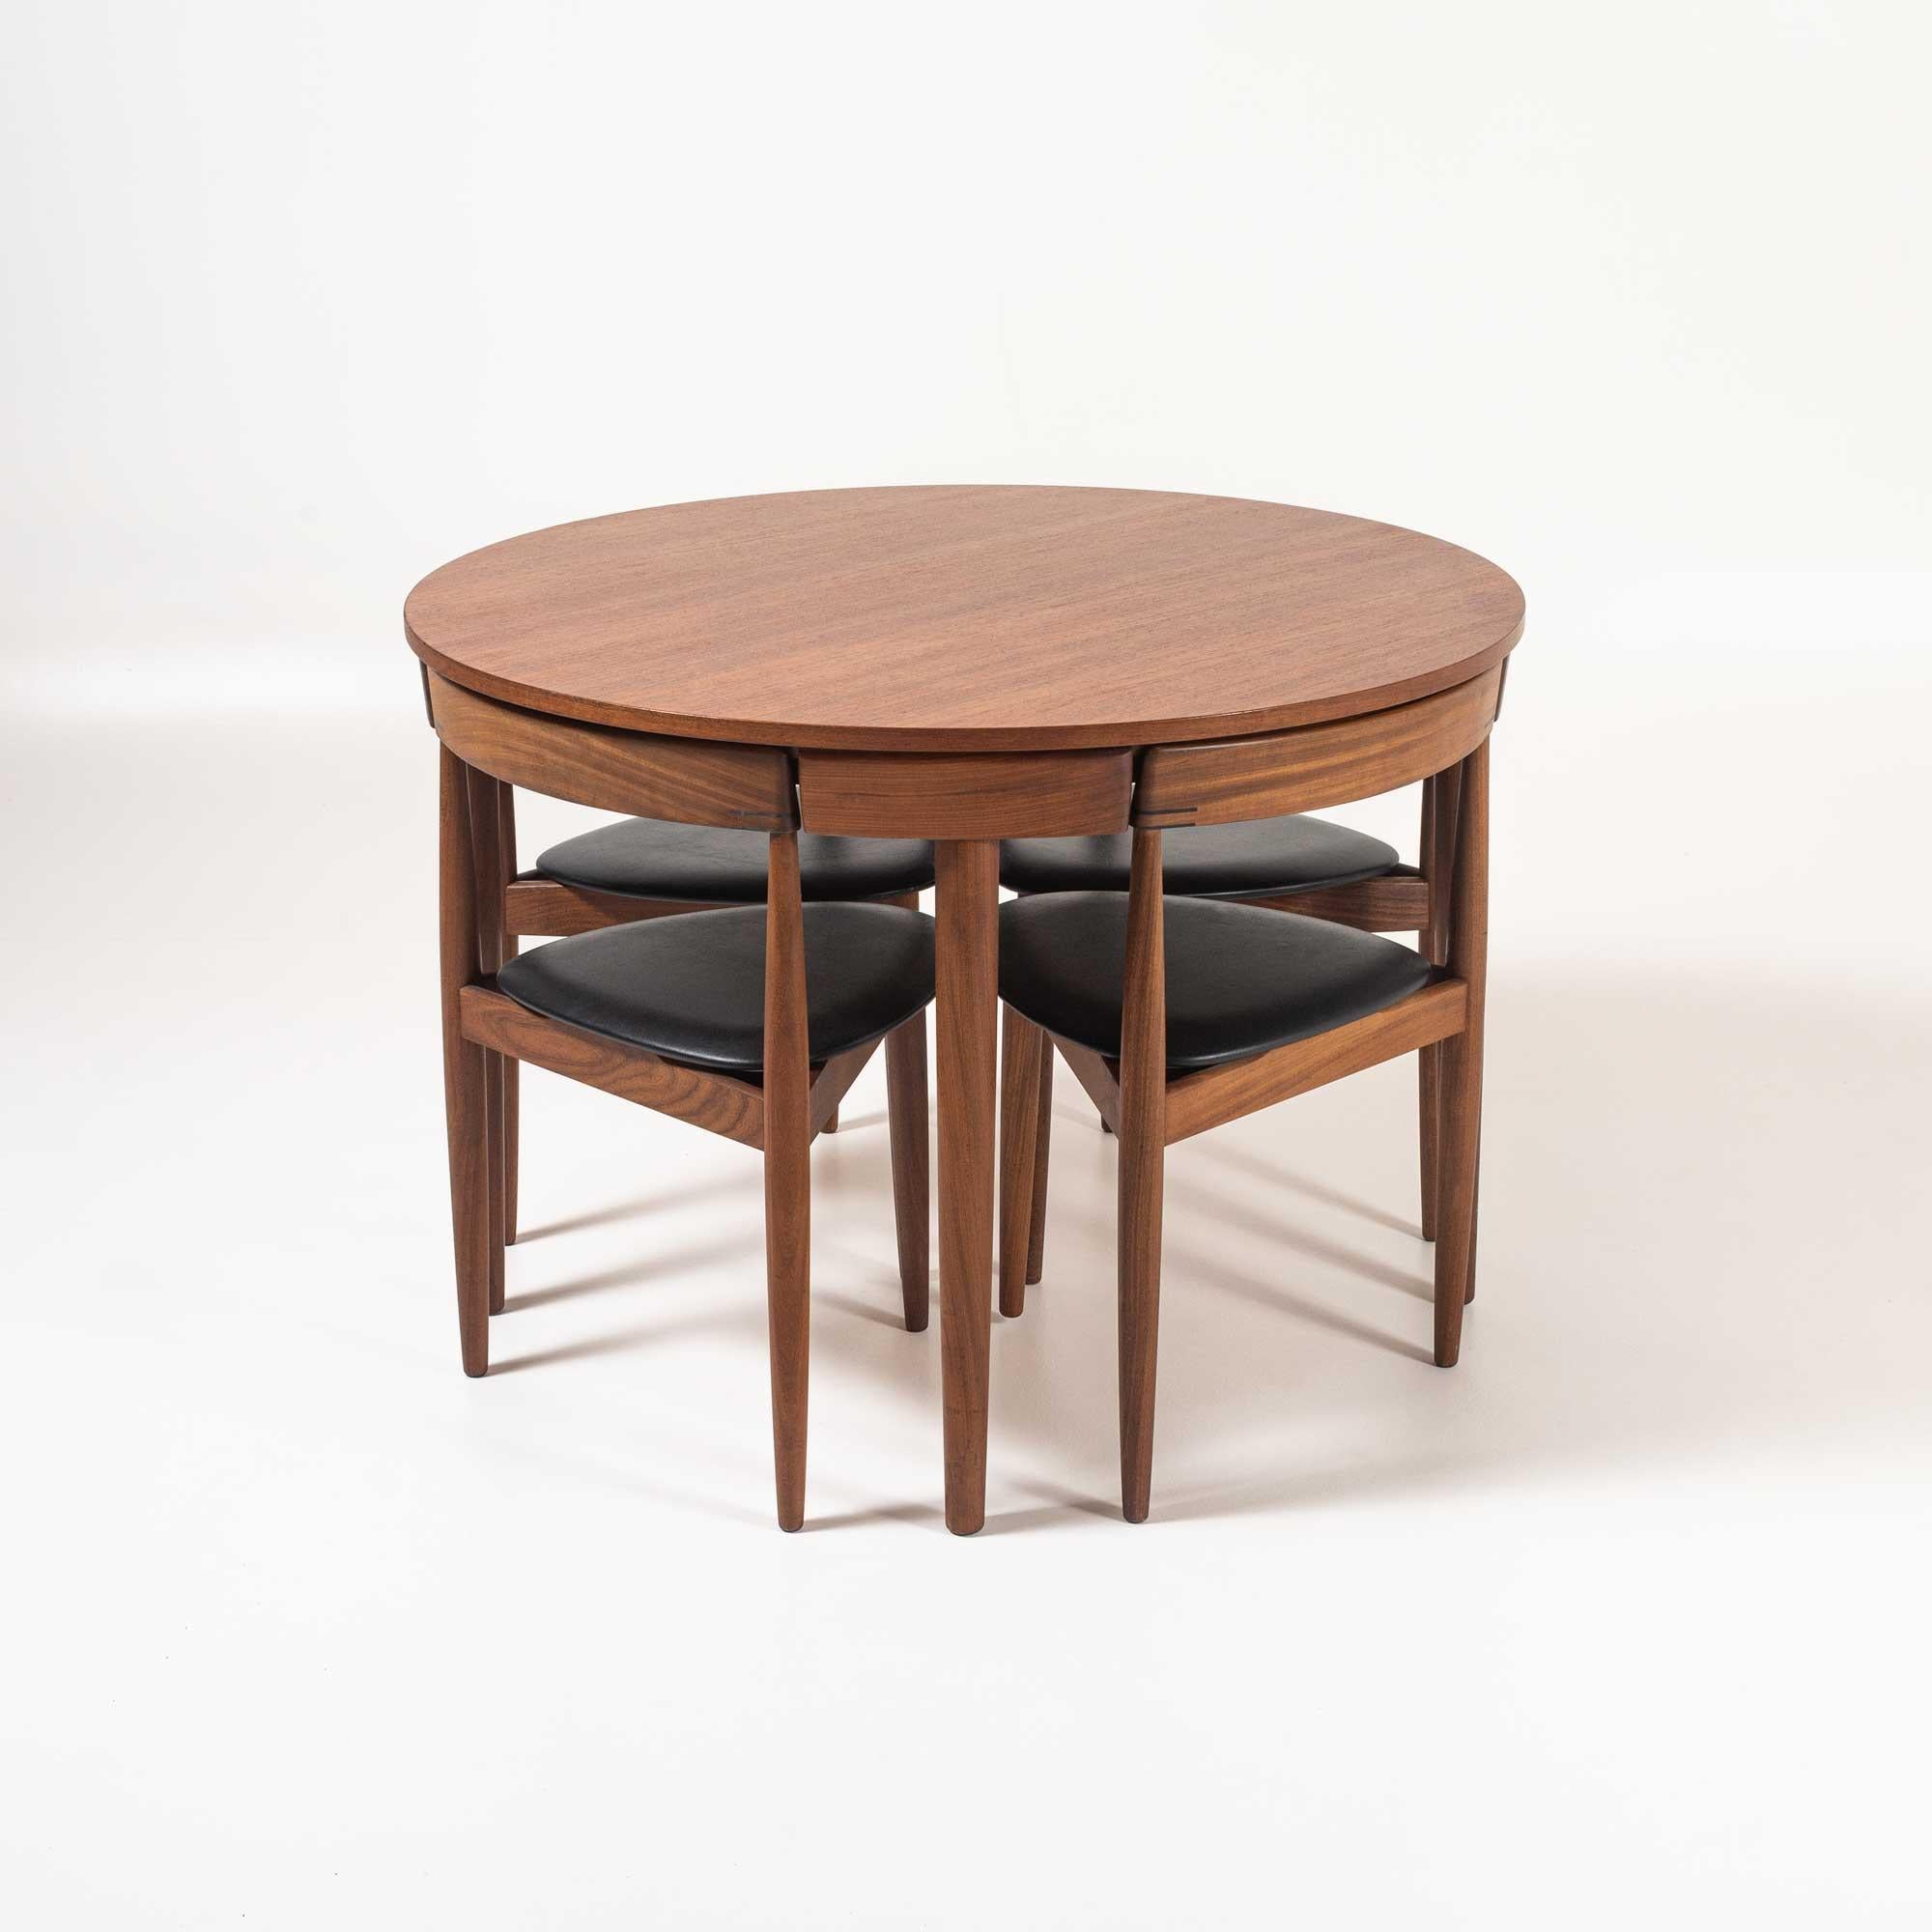 Classic Danish design dining table set by Hans Olsen for Frem Rojle, Denmark 1952. Four tripod chair are designed to be neatly tucked right under the table. Intricate details on the back of each chair. The table and chairs have been refinished.